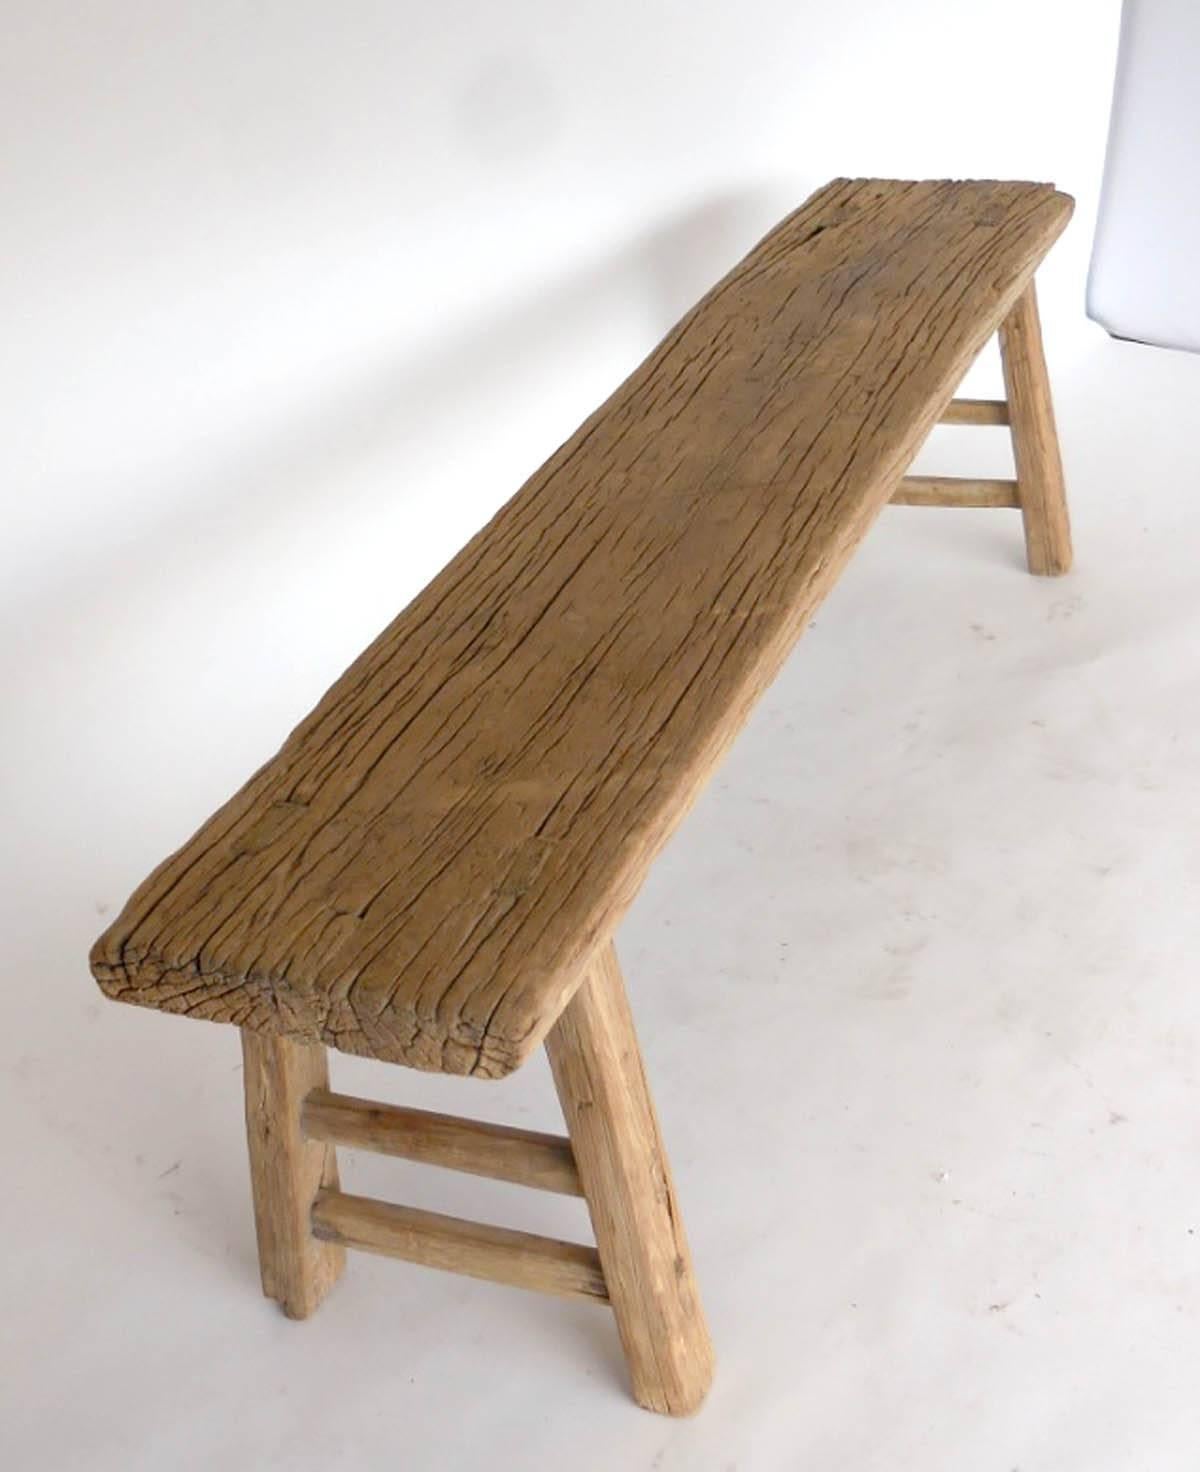 19th century Chinese elmwood bench from one plank, double short stretchers. Beautiful smooth natural patina. Sturdy and functional.